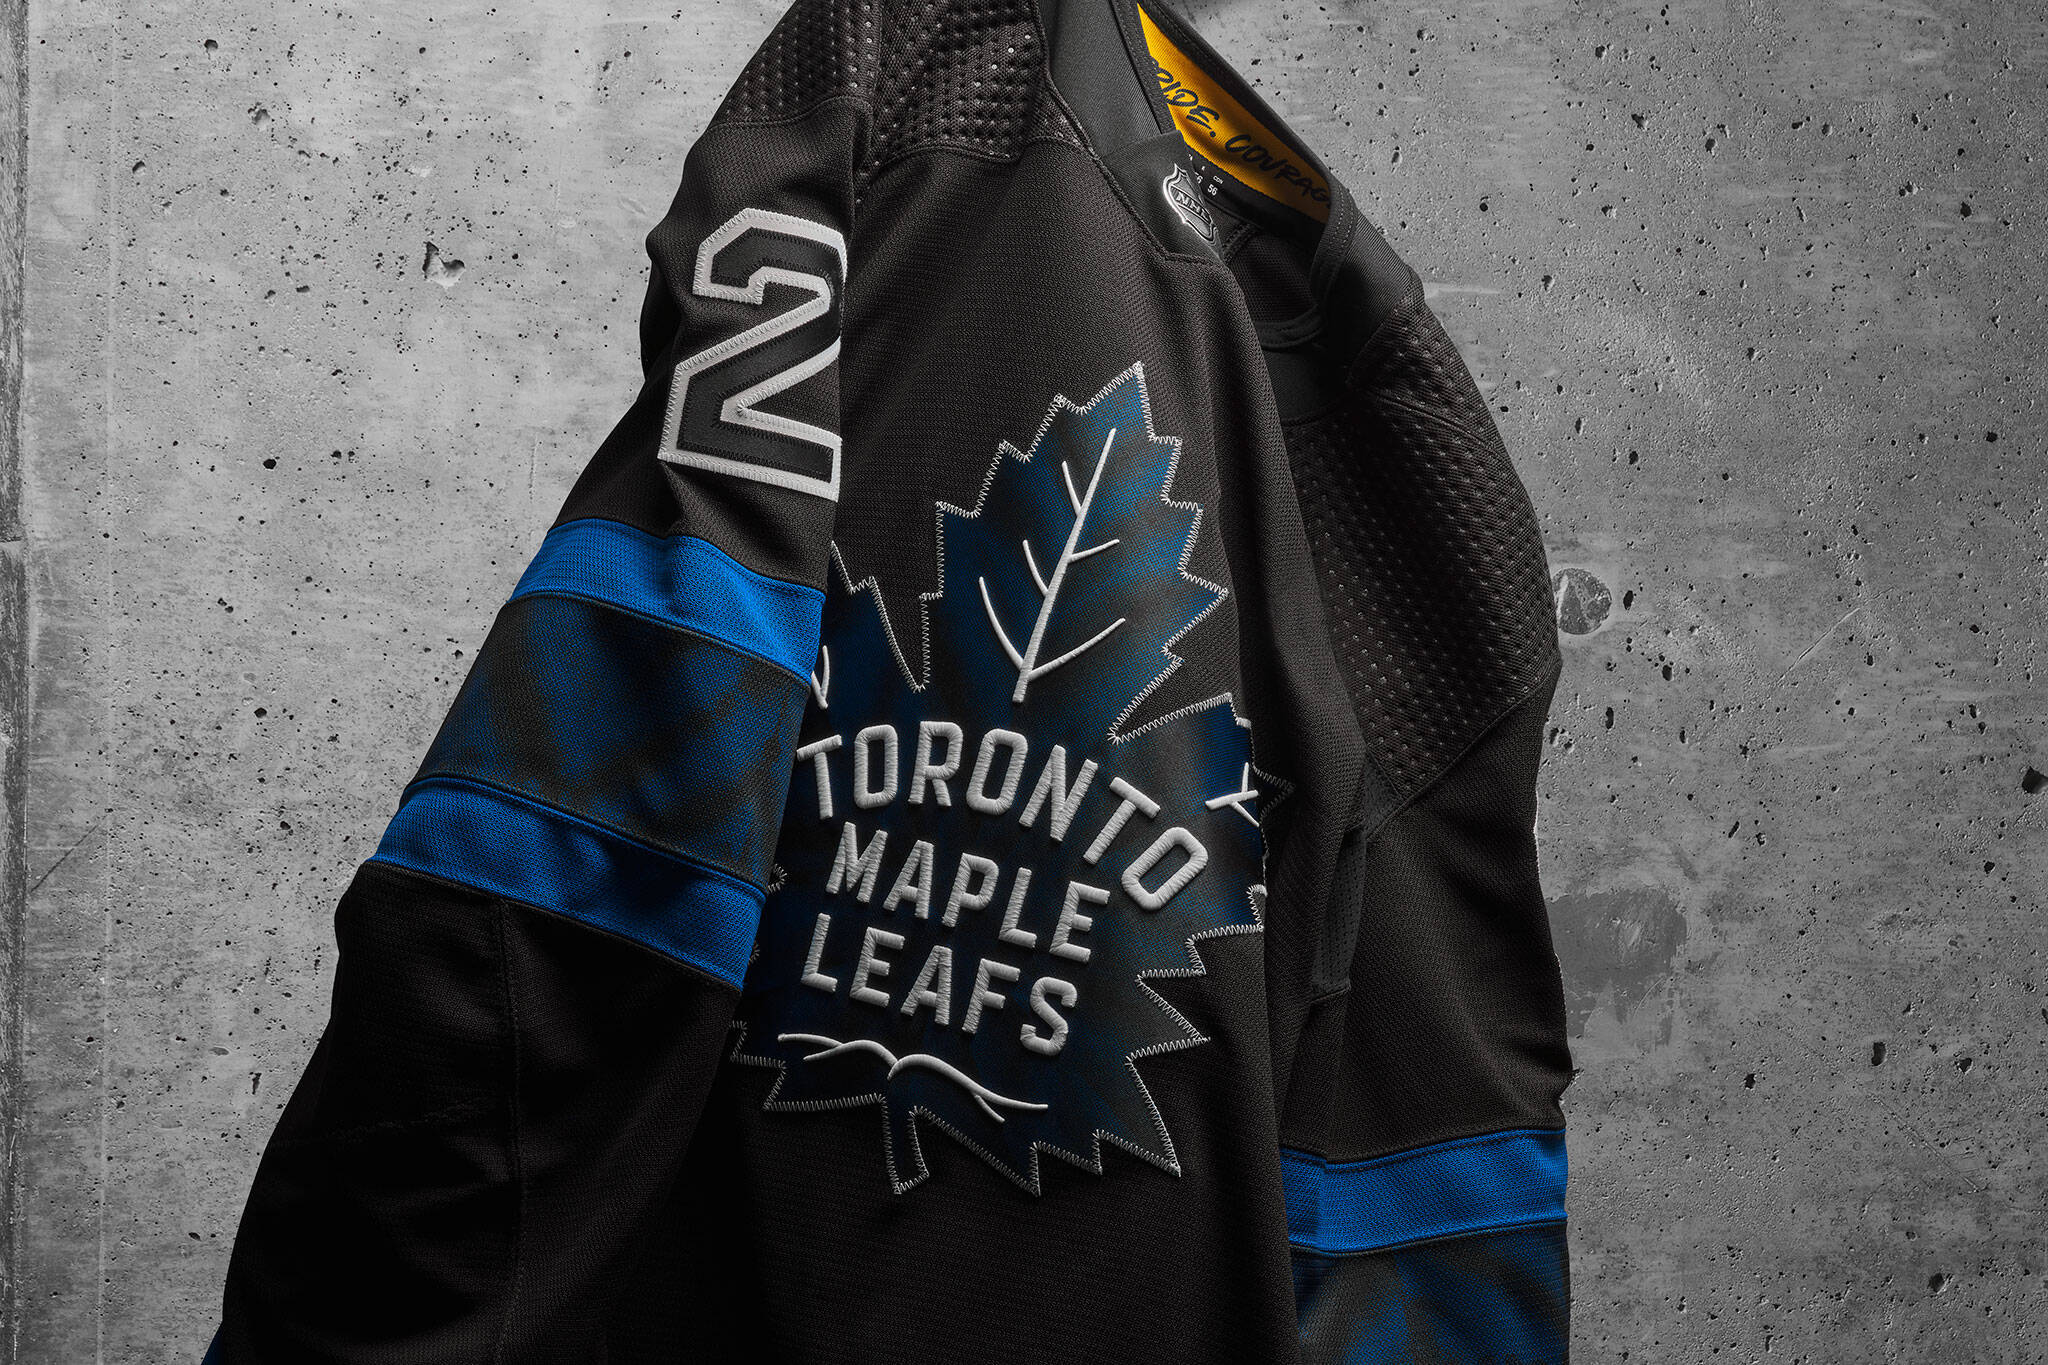 Justin Bieber Hockey Jersey for Toronto Maple Leafs Is the NHL's Top Seller  - Bloomberg